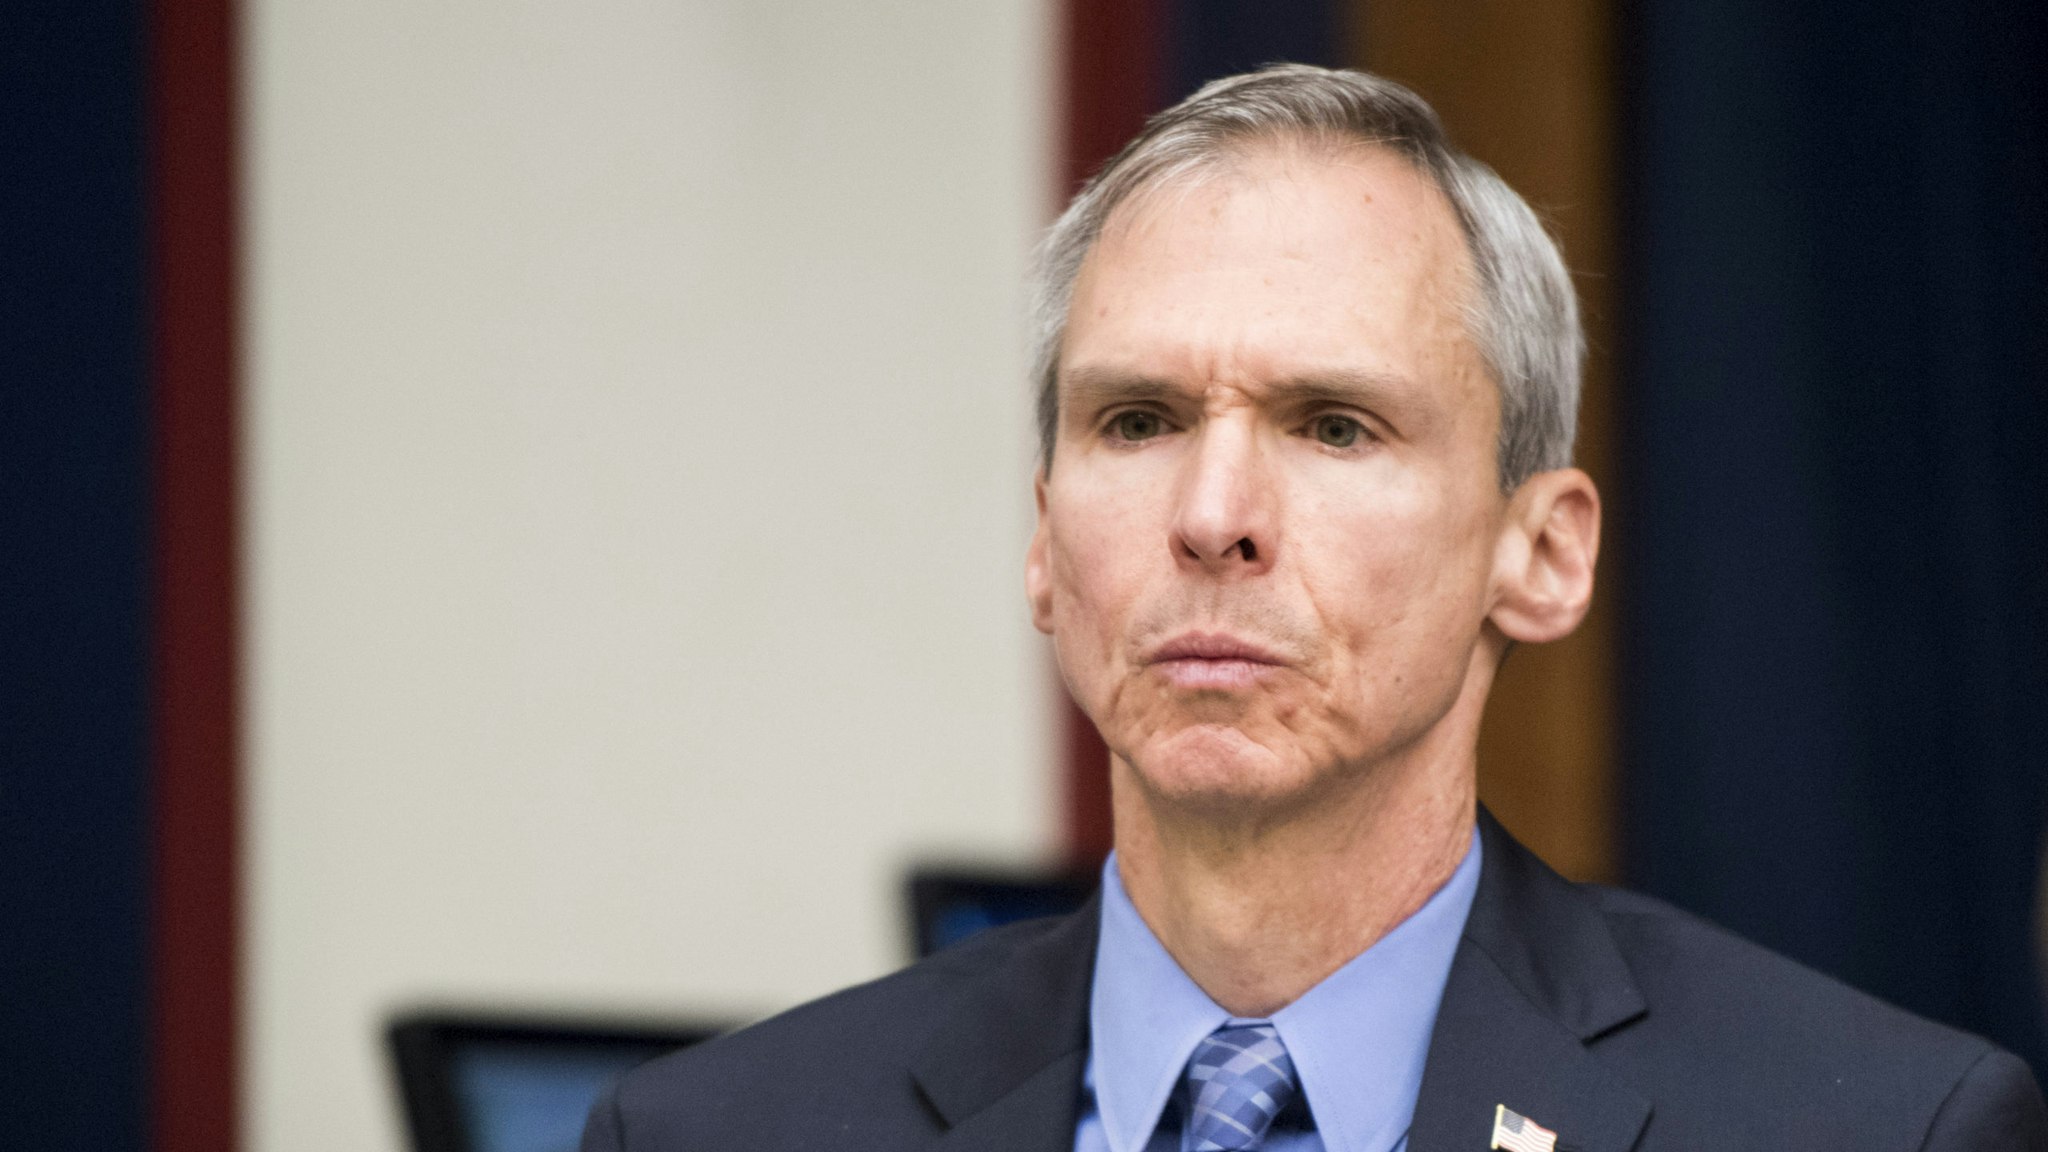 UNITED STATES - JUNE 19: Rep. Dan Lipinski, D-Ill., participates in the House Transportation and Infrastructure Subcommittee on Aviation hearing on "Status of the Boeing 737 MAX: Stakeholder Perspectives" on Wednesday, June 19, 2019. (Photo By Bill Clark/CQ Roll Call)